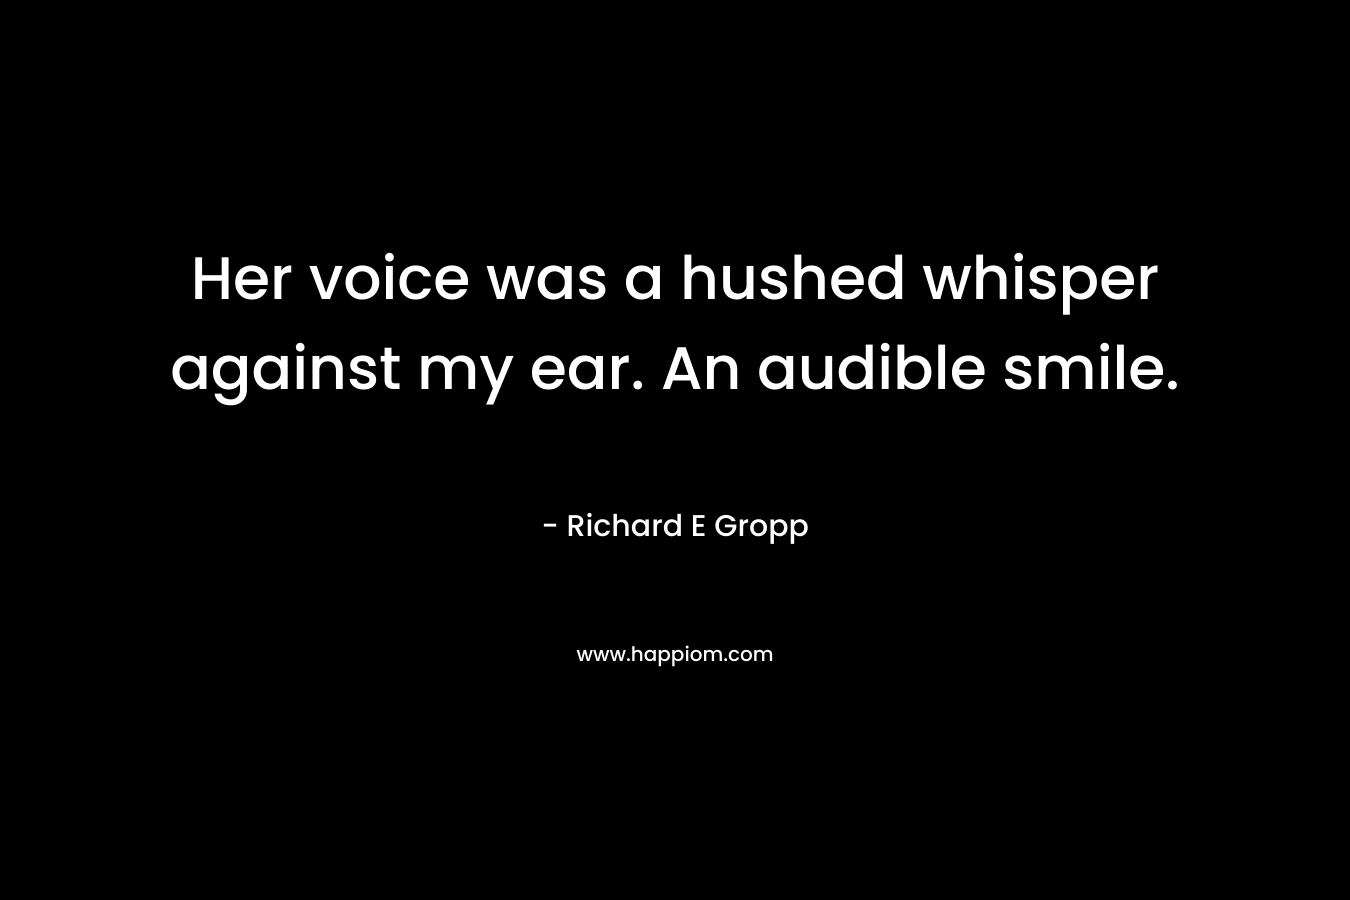 Her voice was a hushed whisper against my ear. An audible smile.